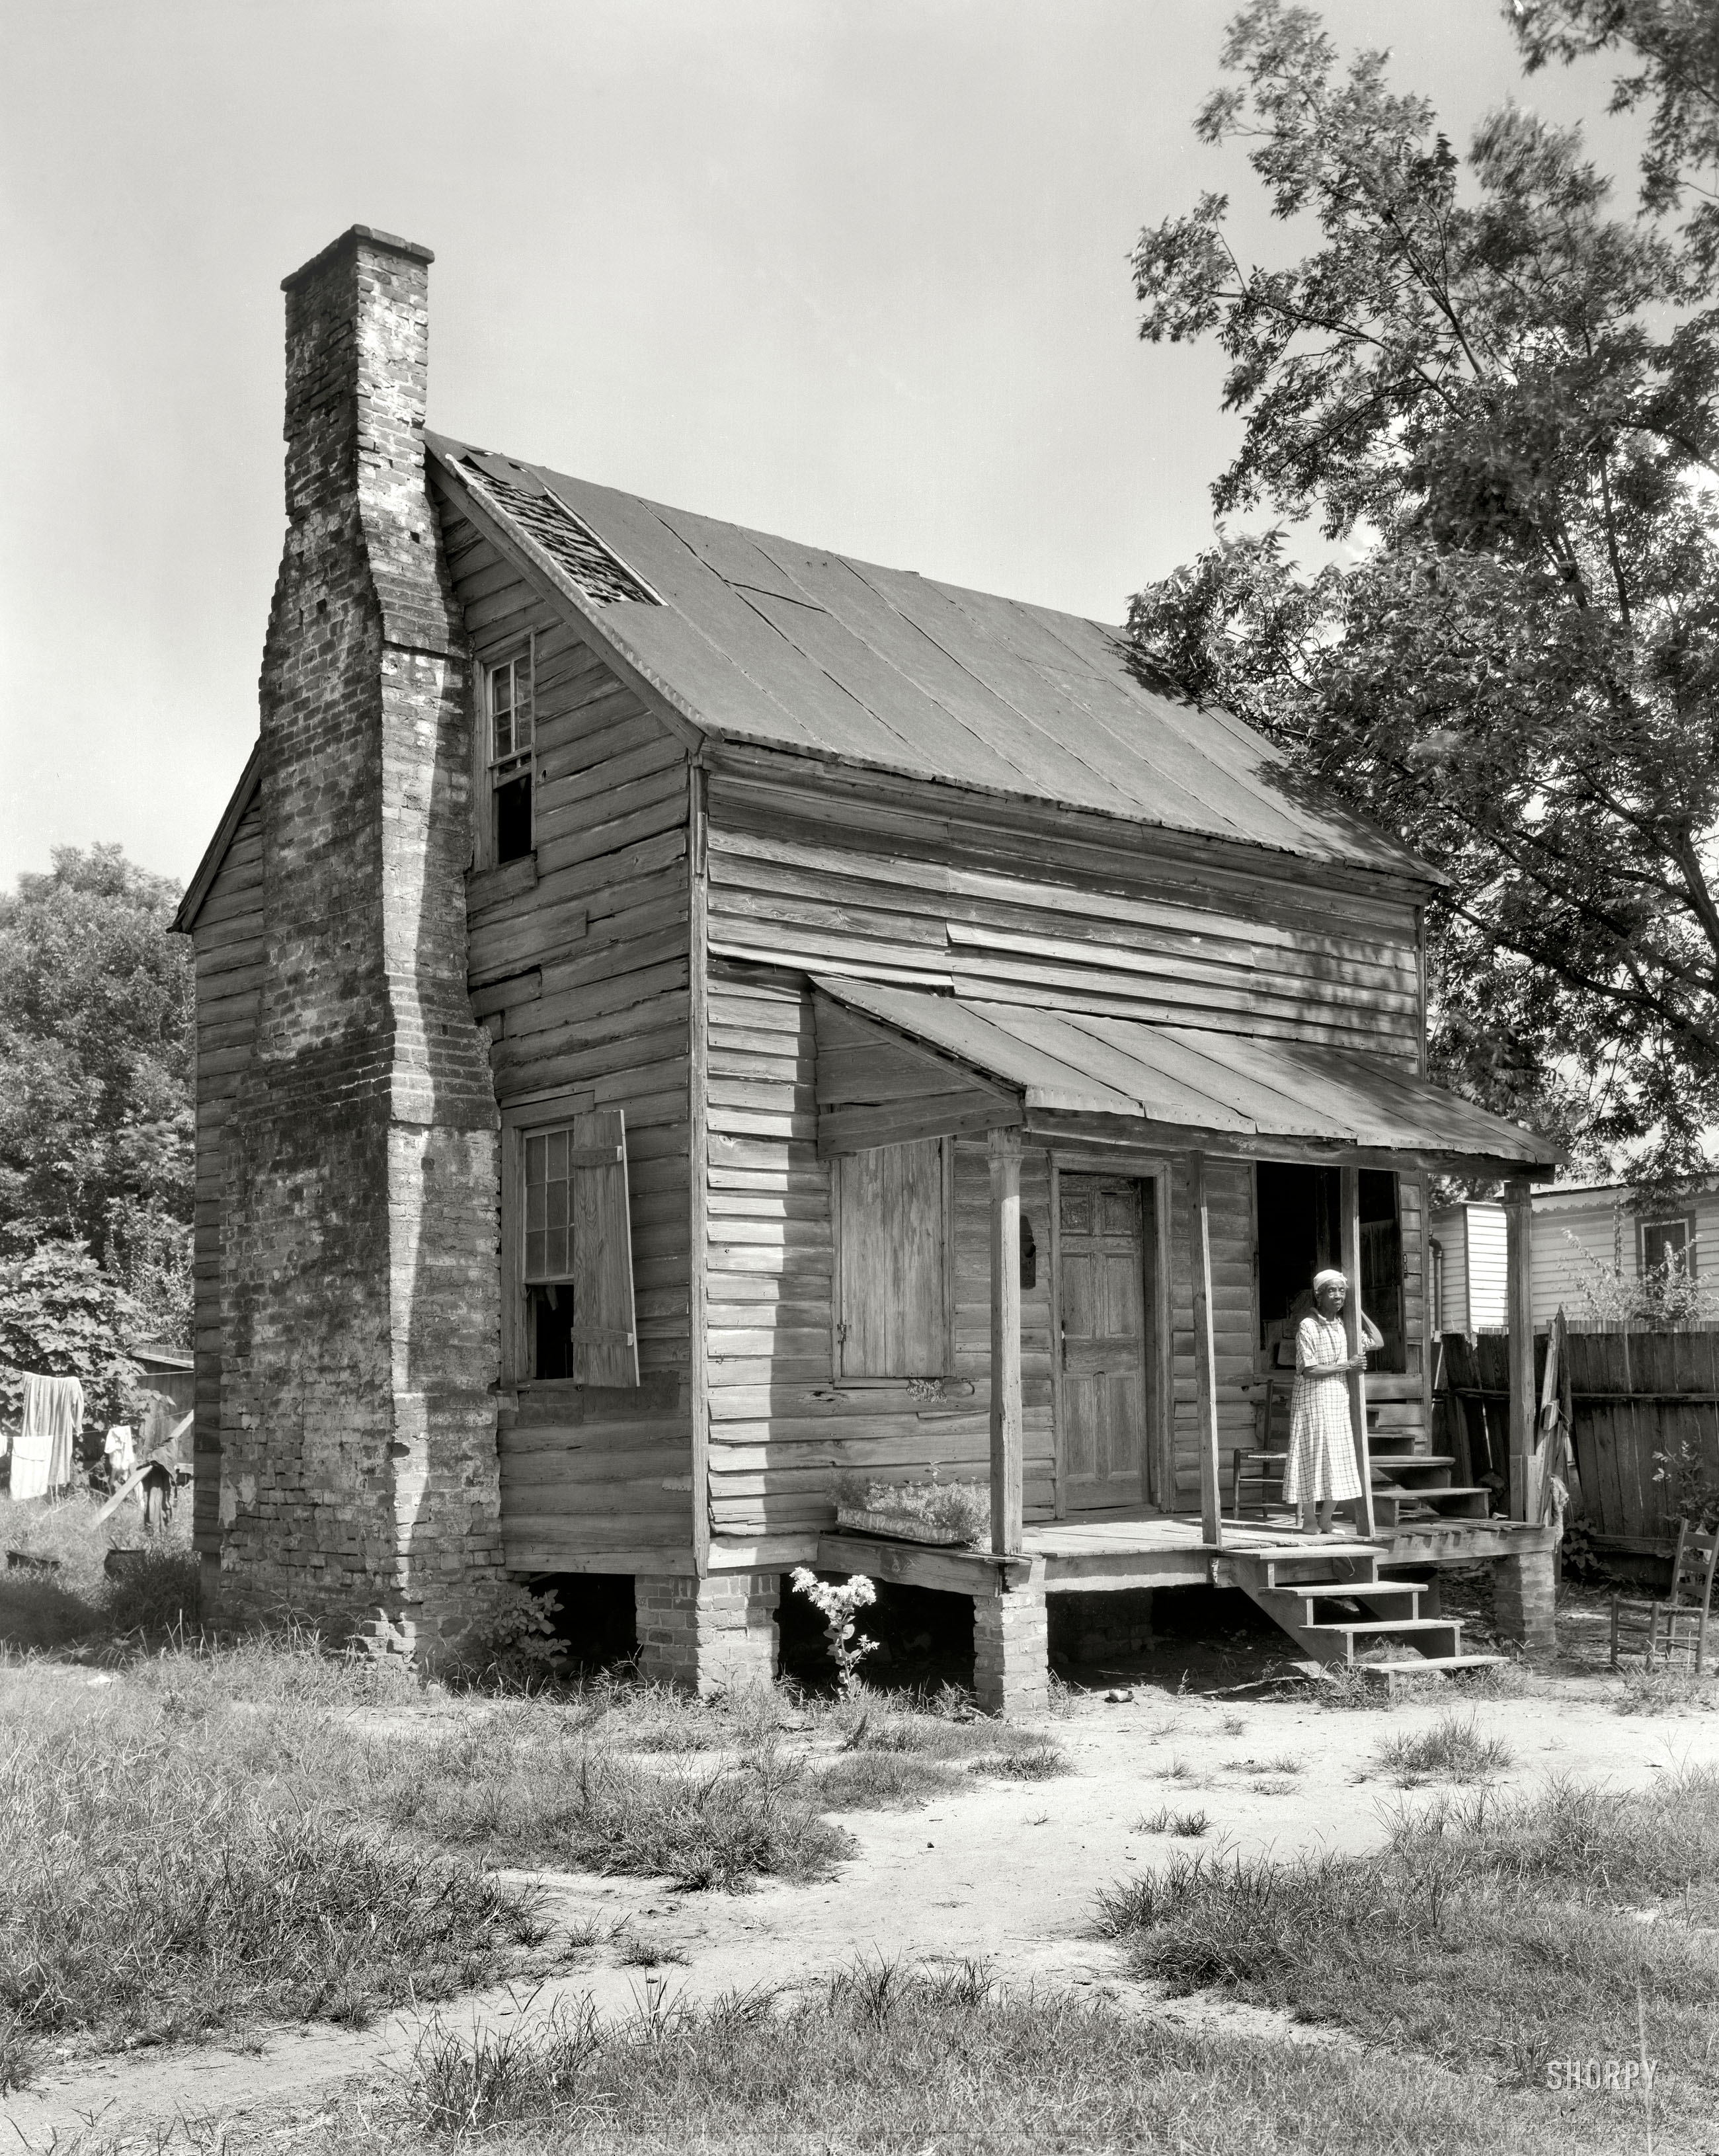 1944. Baldwin County, Georgia. "Former slave cabin, Milledgeville vicinity." A locale perhaps best known as the stomping grounds of the writer Flannery O'Connor. 8x10 acetate negative by Frances Benjamin Johnston. View full size.